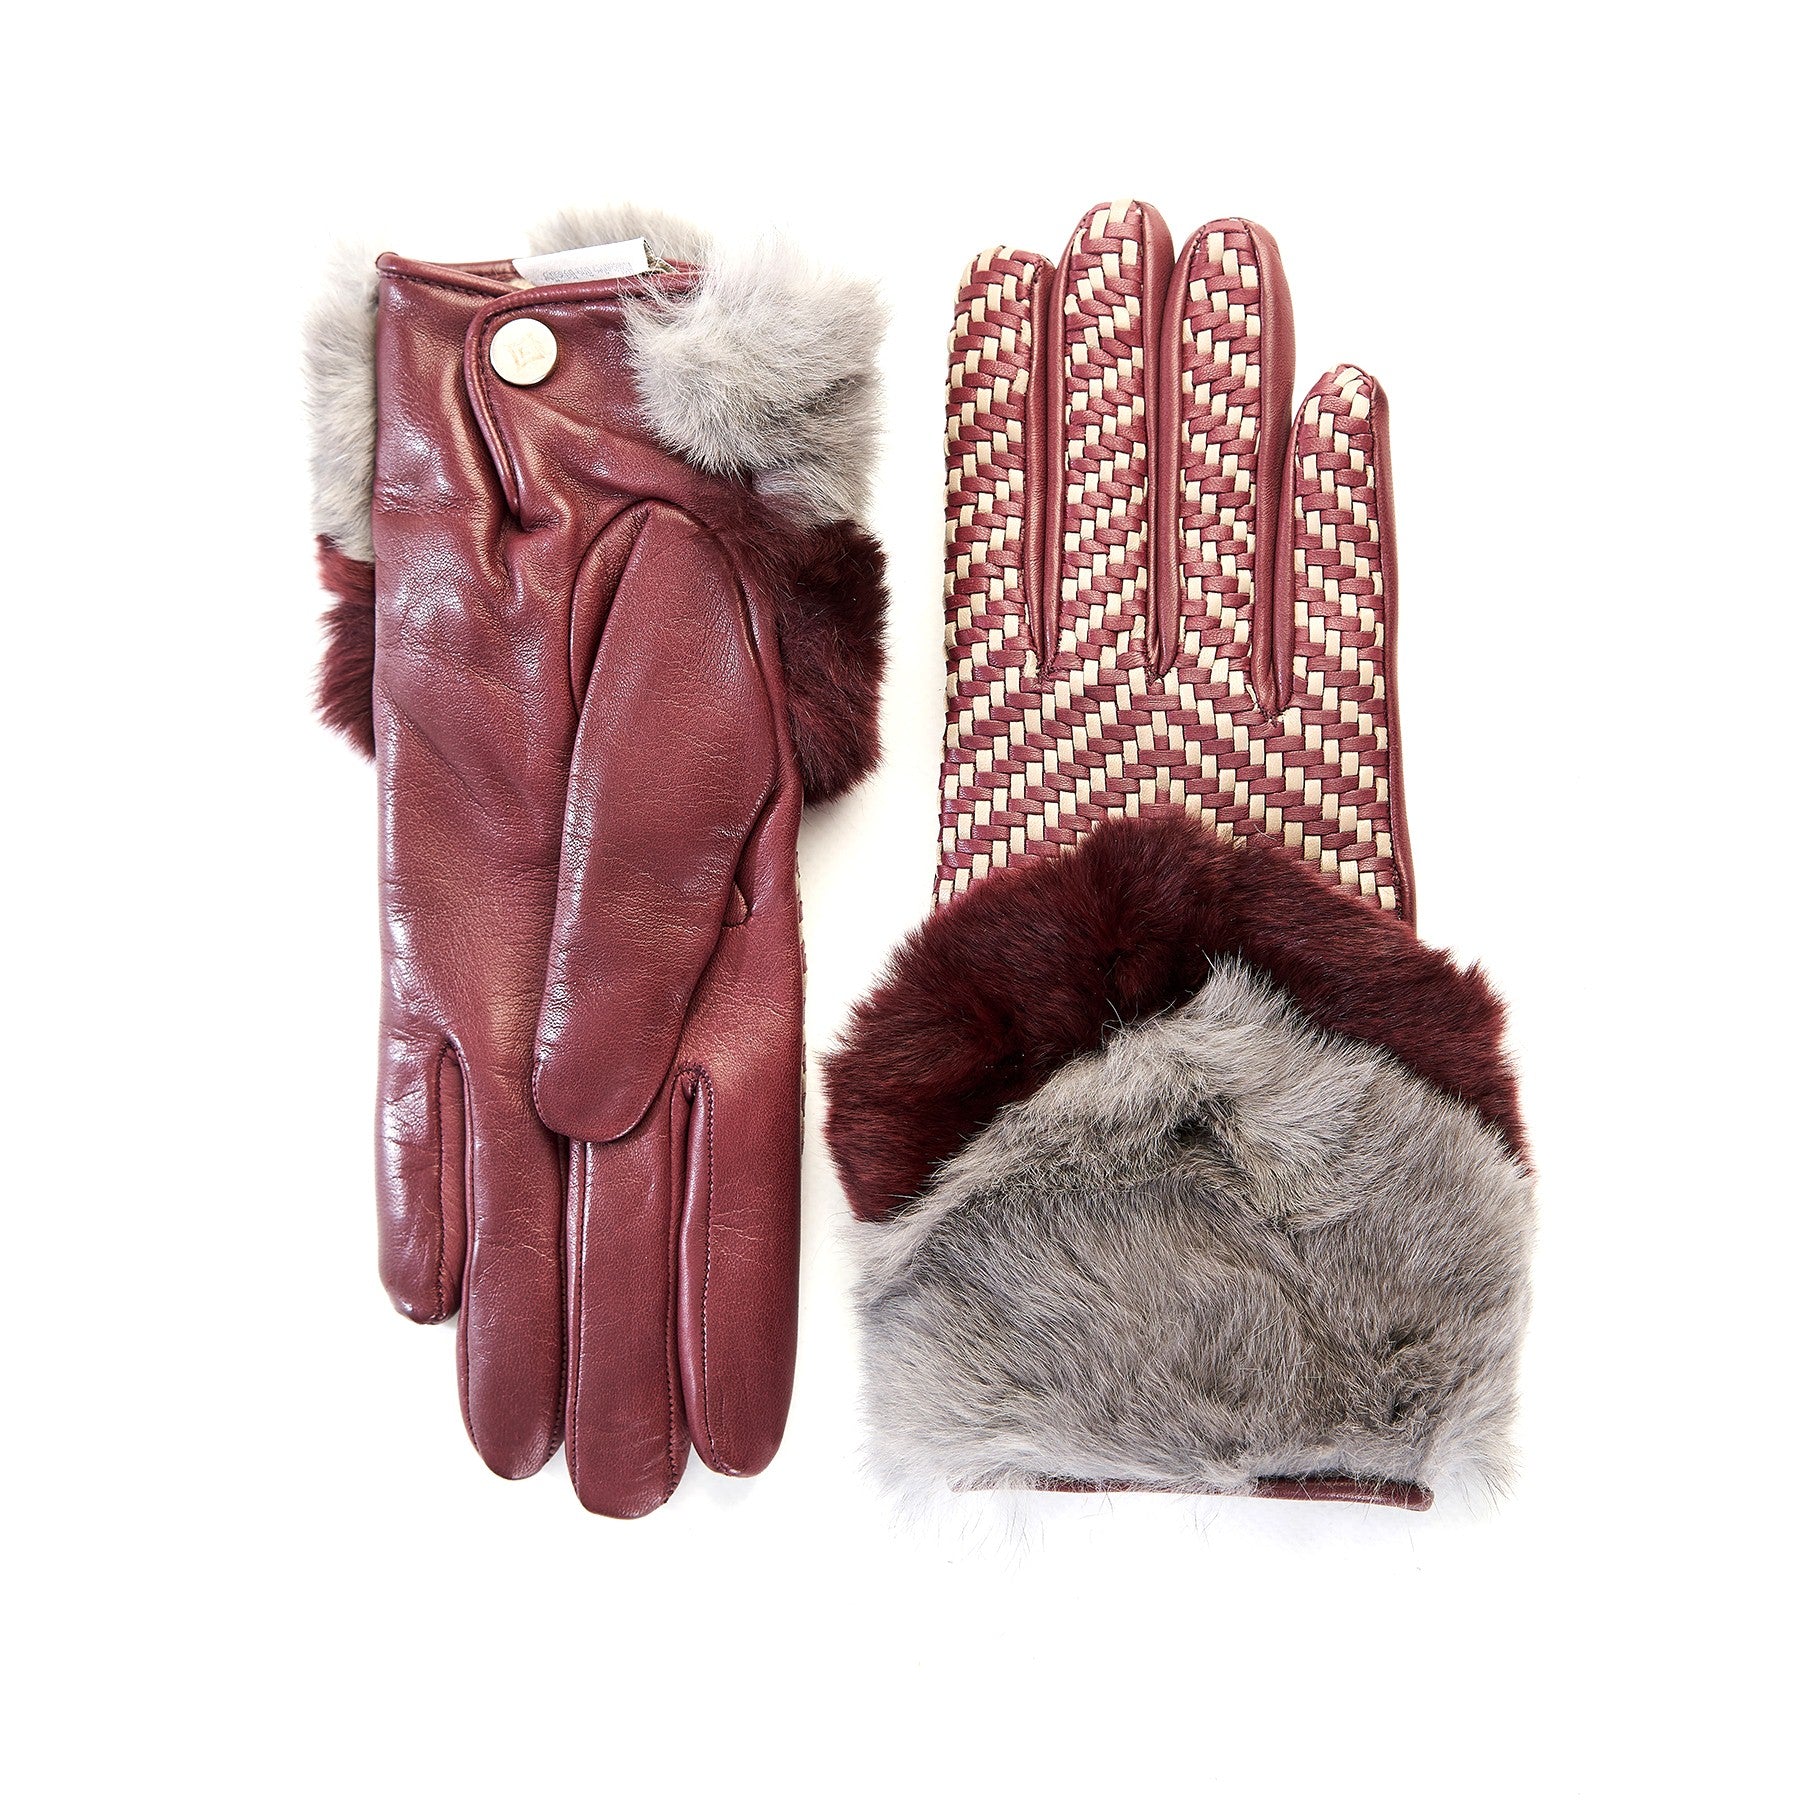 Women's bordeaux leather gloves with bicolor woven top panel and rex rabbit fur cuff